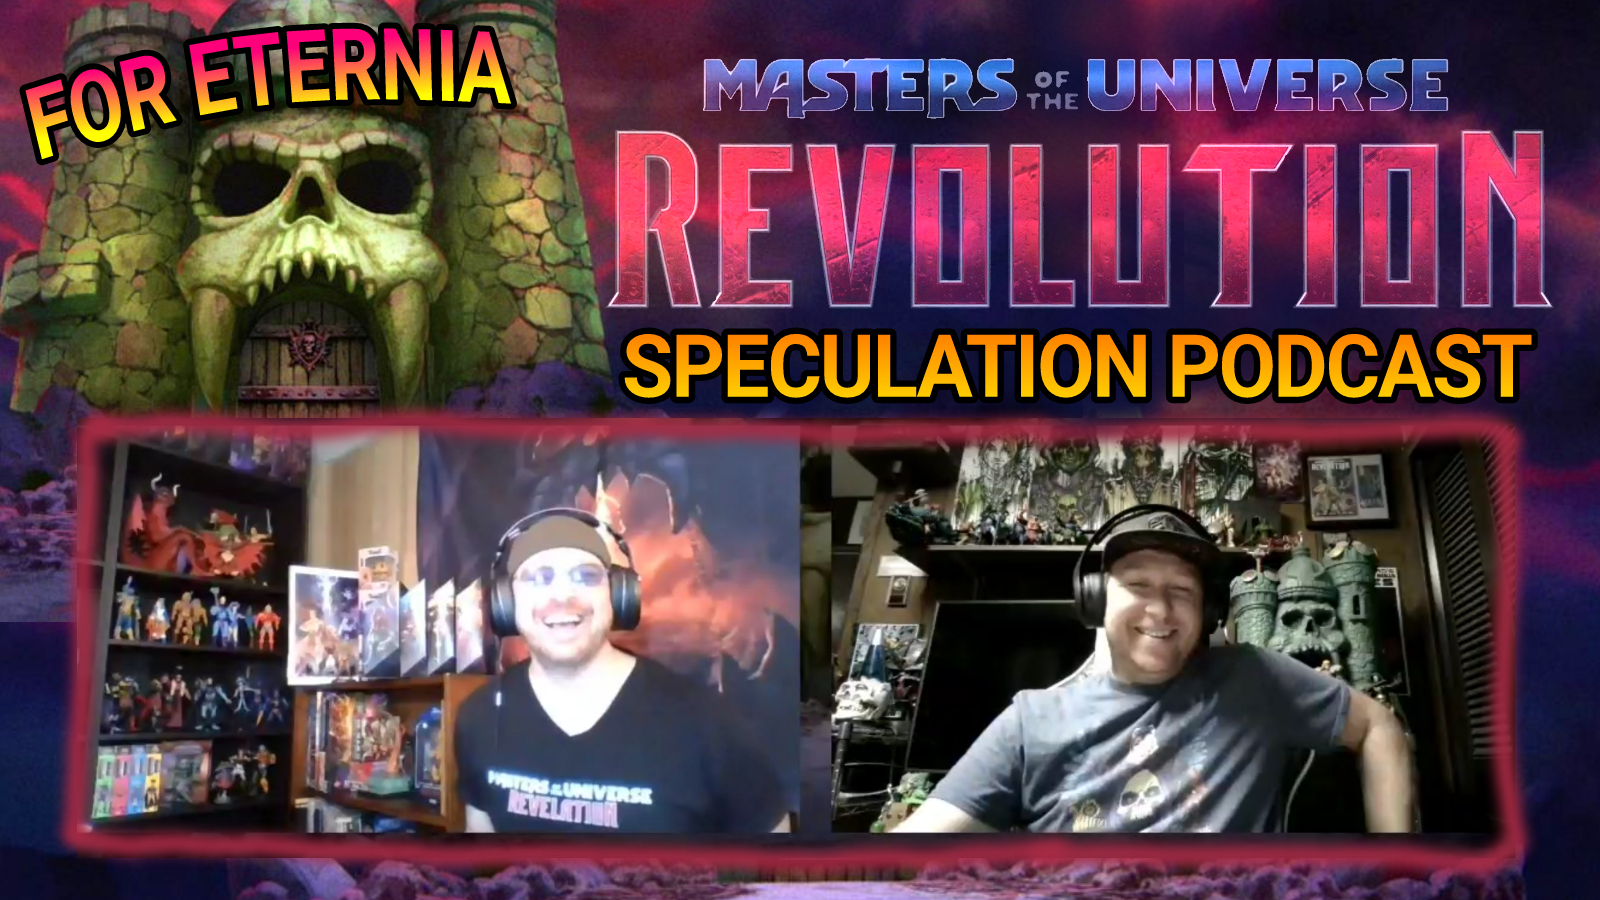 ”Masters of the Universe: Revolution” Speculation Extravaganza! Listen to the FOR ETERNIA Official Podcast 004!